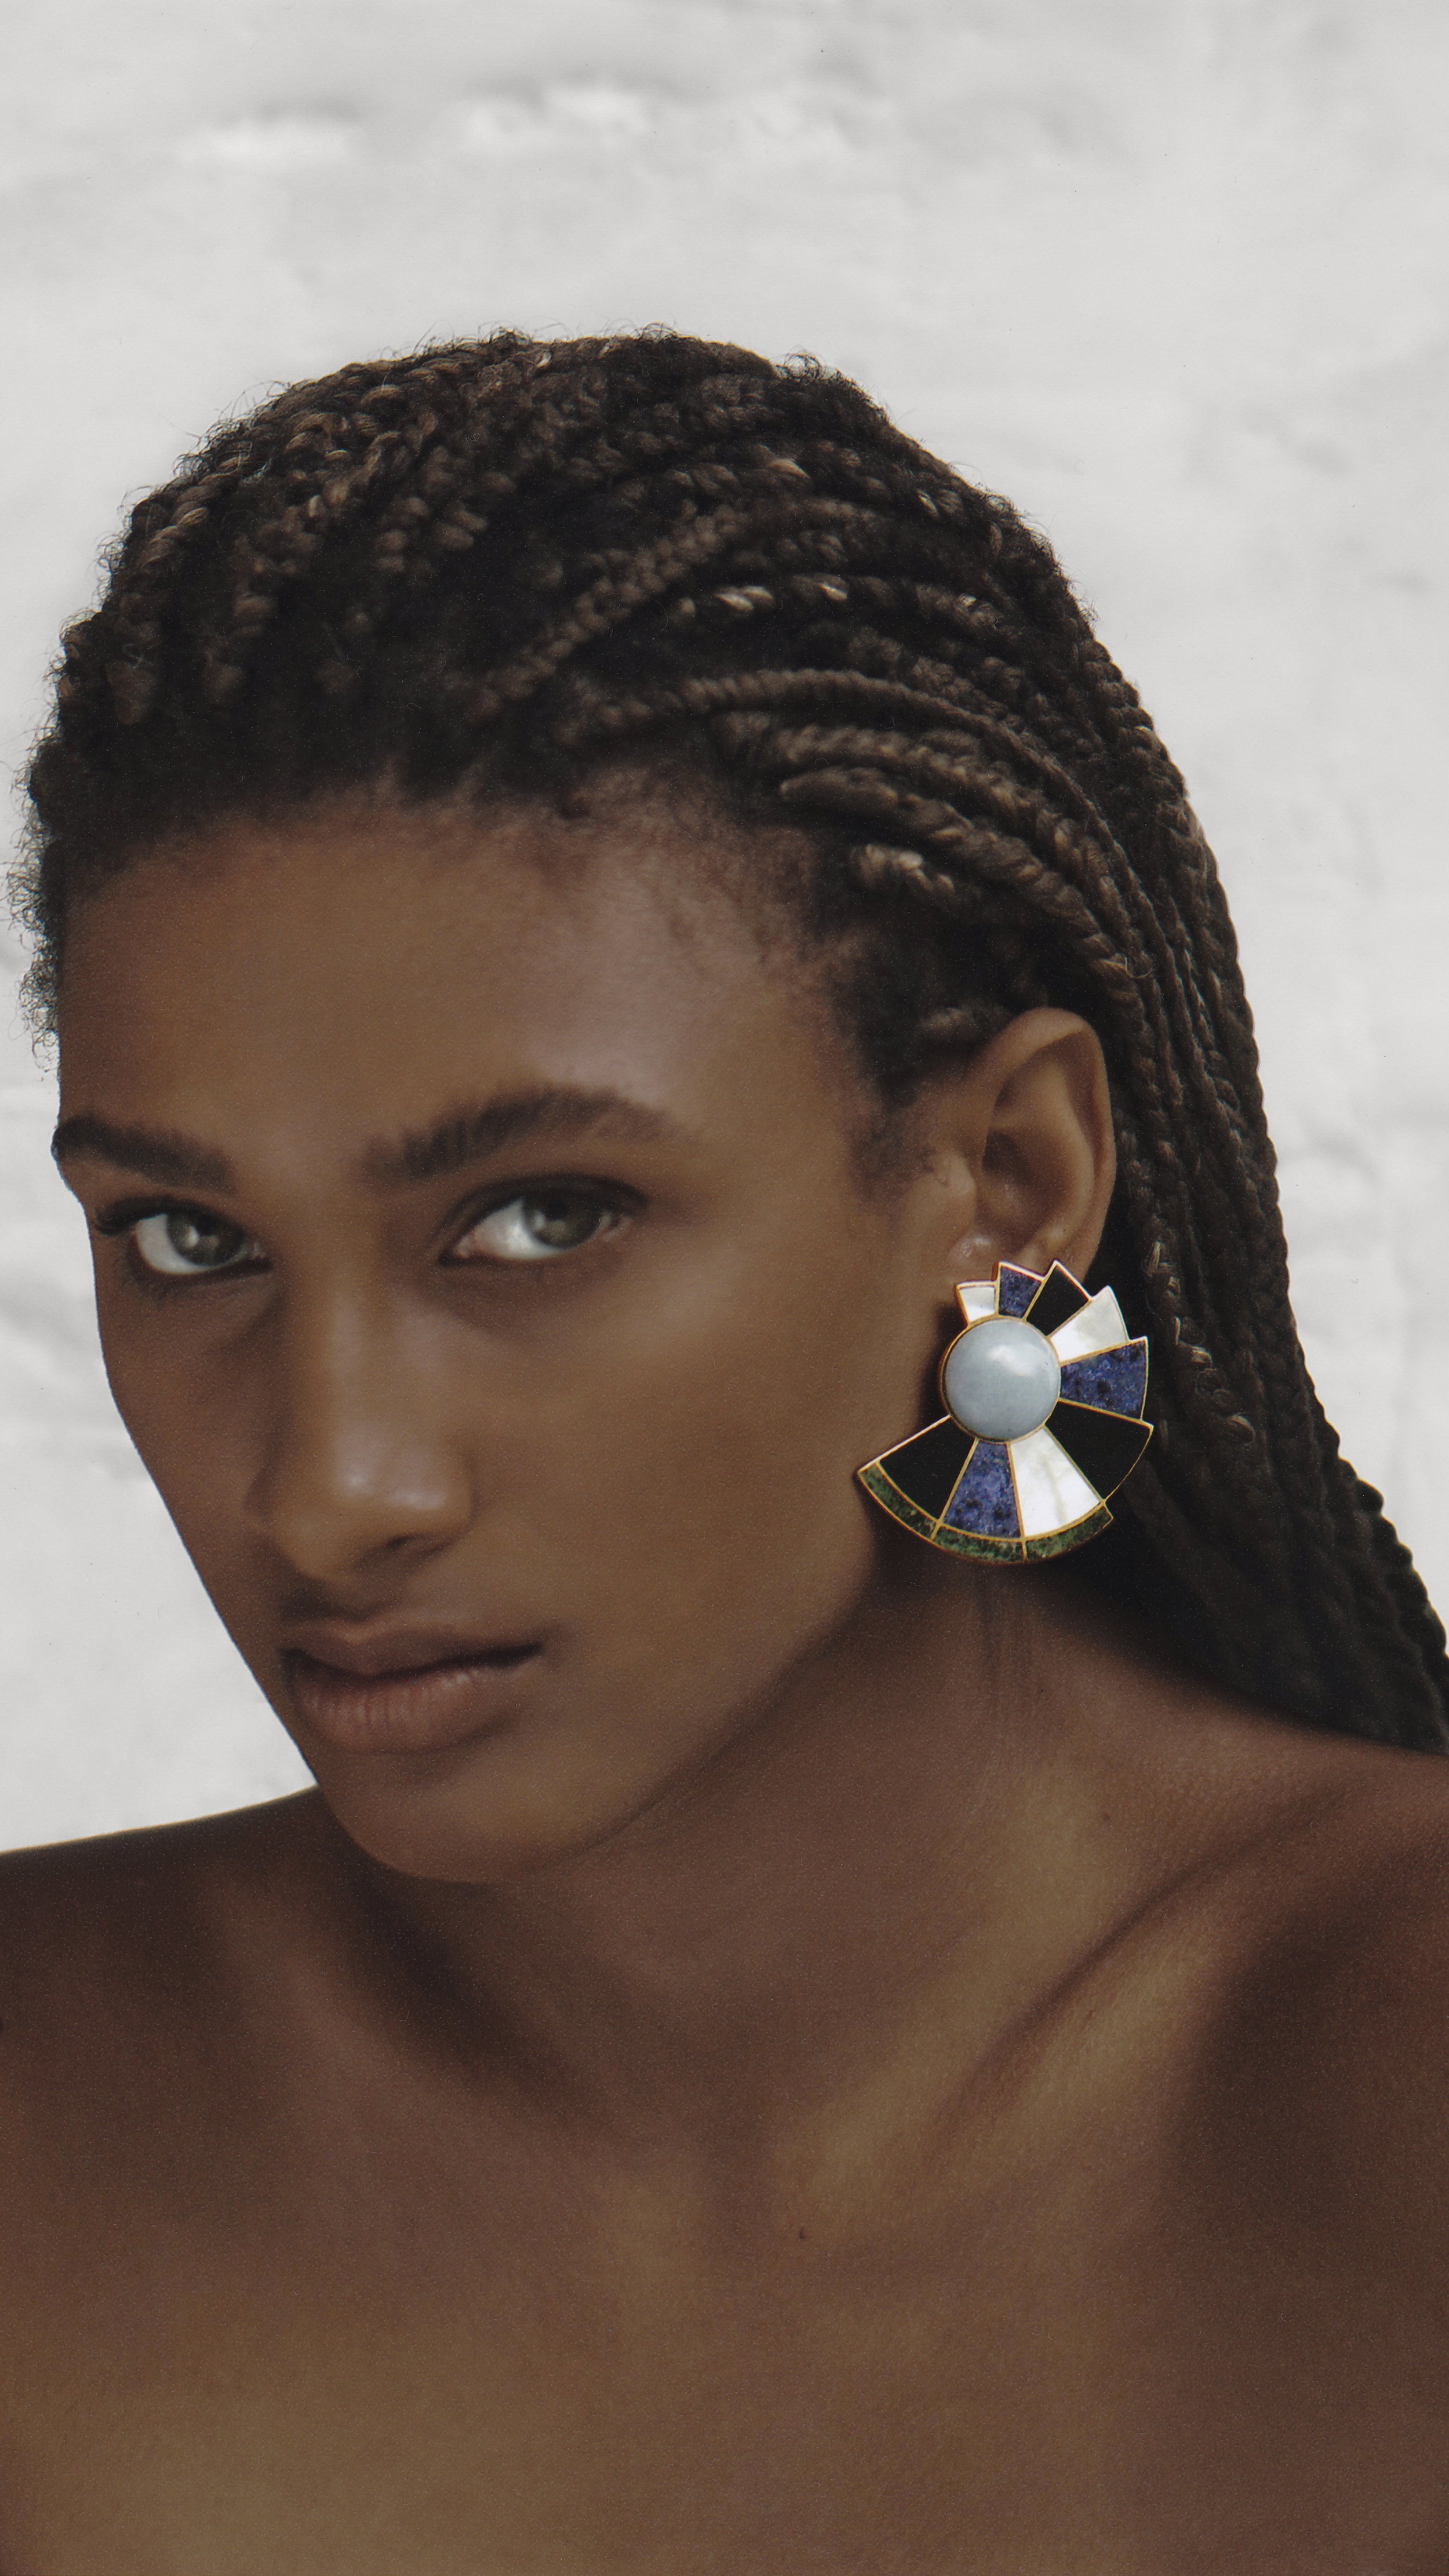 Monica Sordo Earfan Spiral Earrings in patchwork nautilus. In shades of blue, black, grey and green. Photo shows earrings on a model.